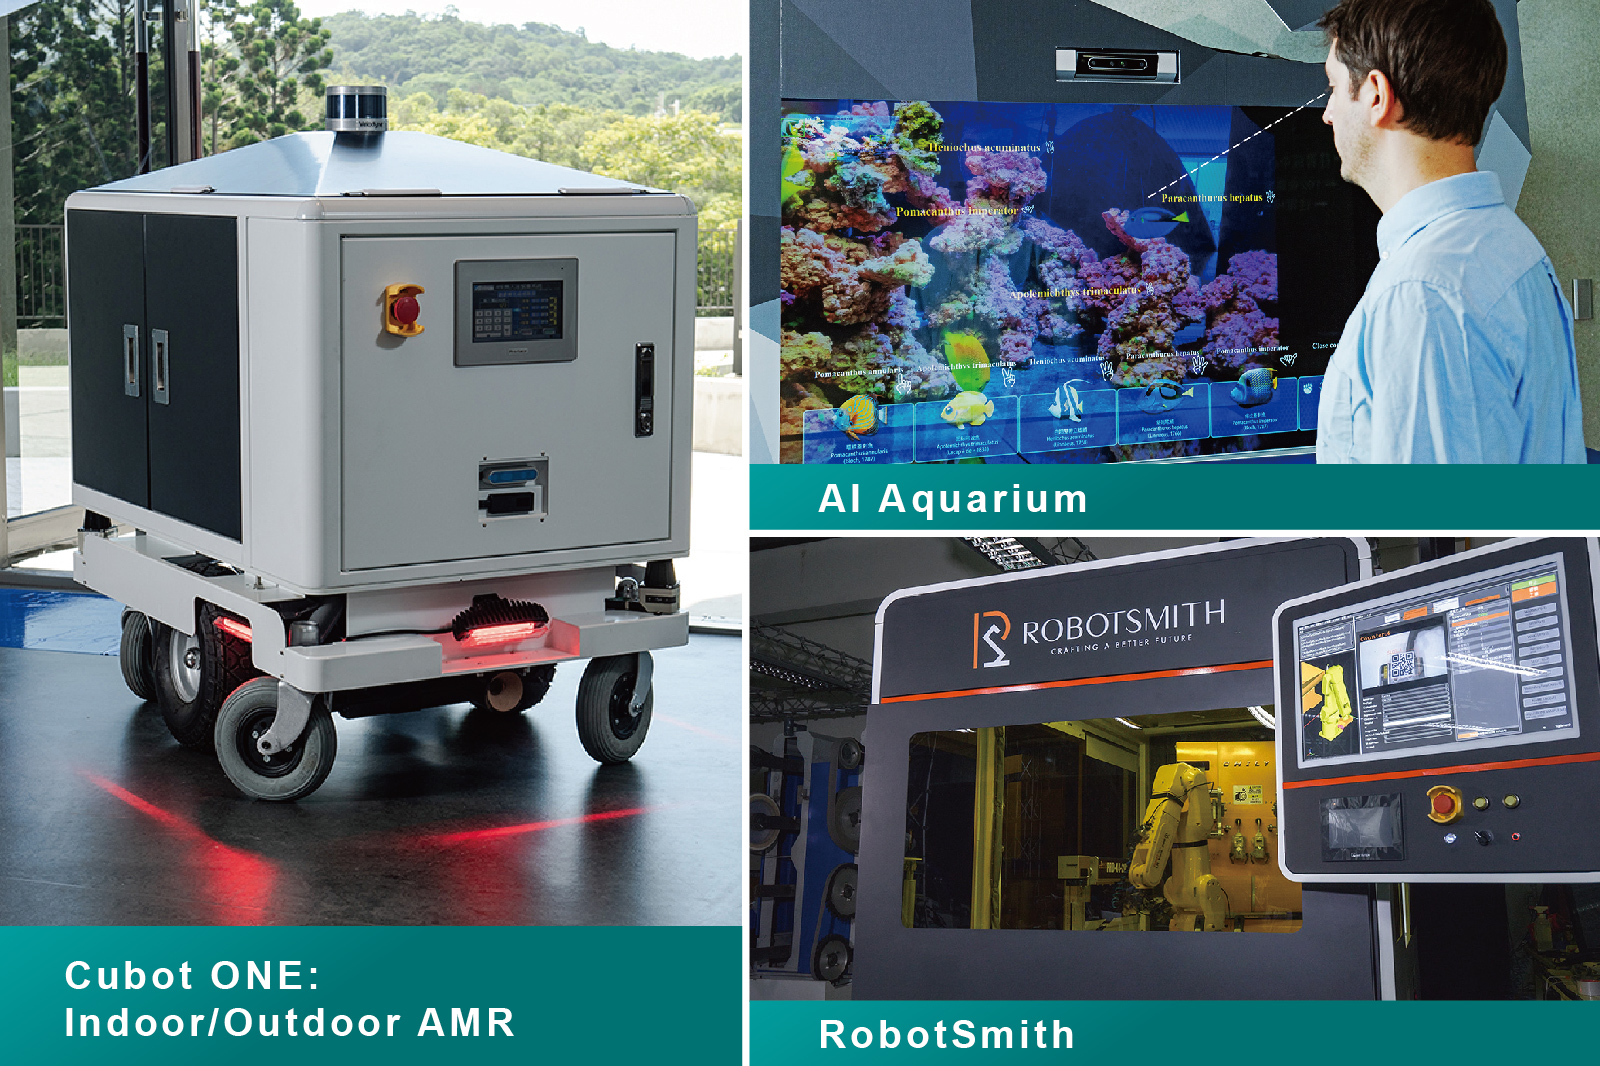 ITRI’s CES 2023 highlight technologies in AI, robotics and ICT include AI Aquarium, Cubot ONE: Indoor/Outdoor AMR, and RobotSmith.